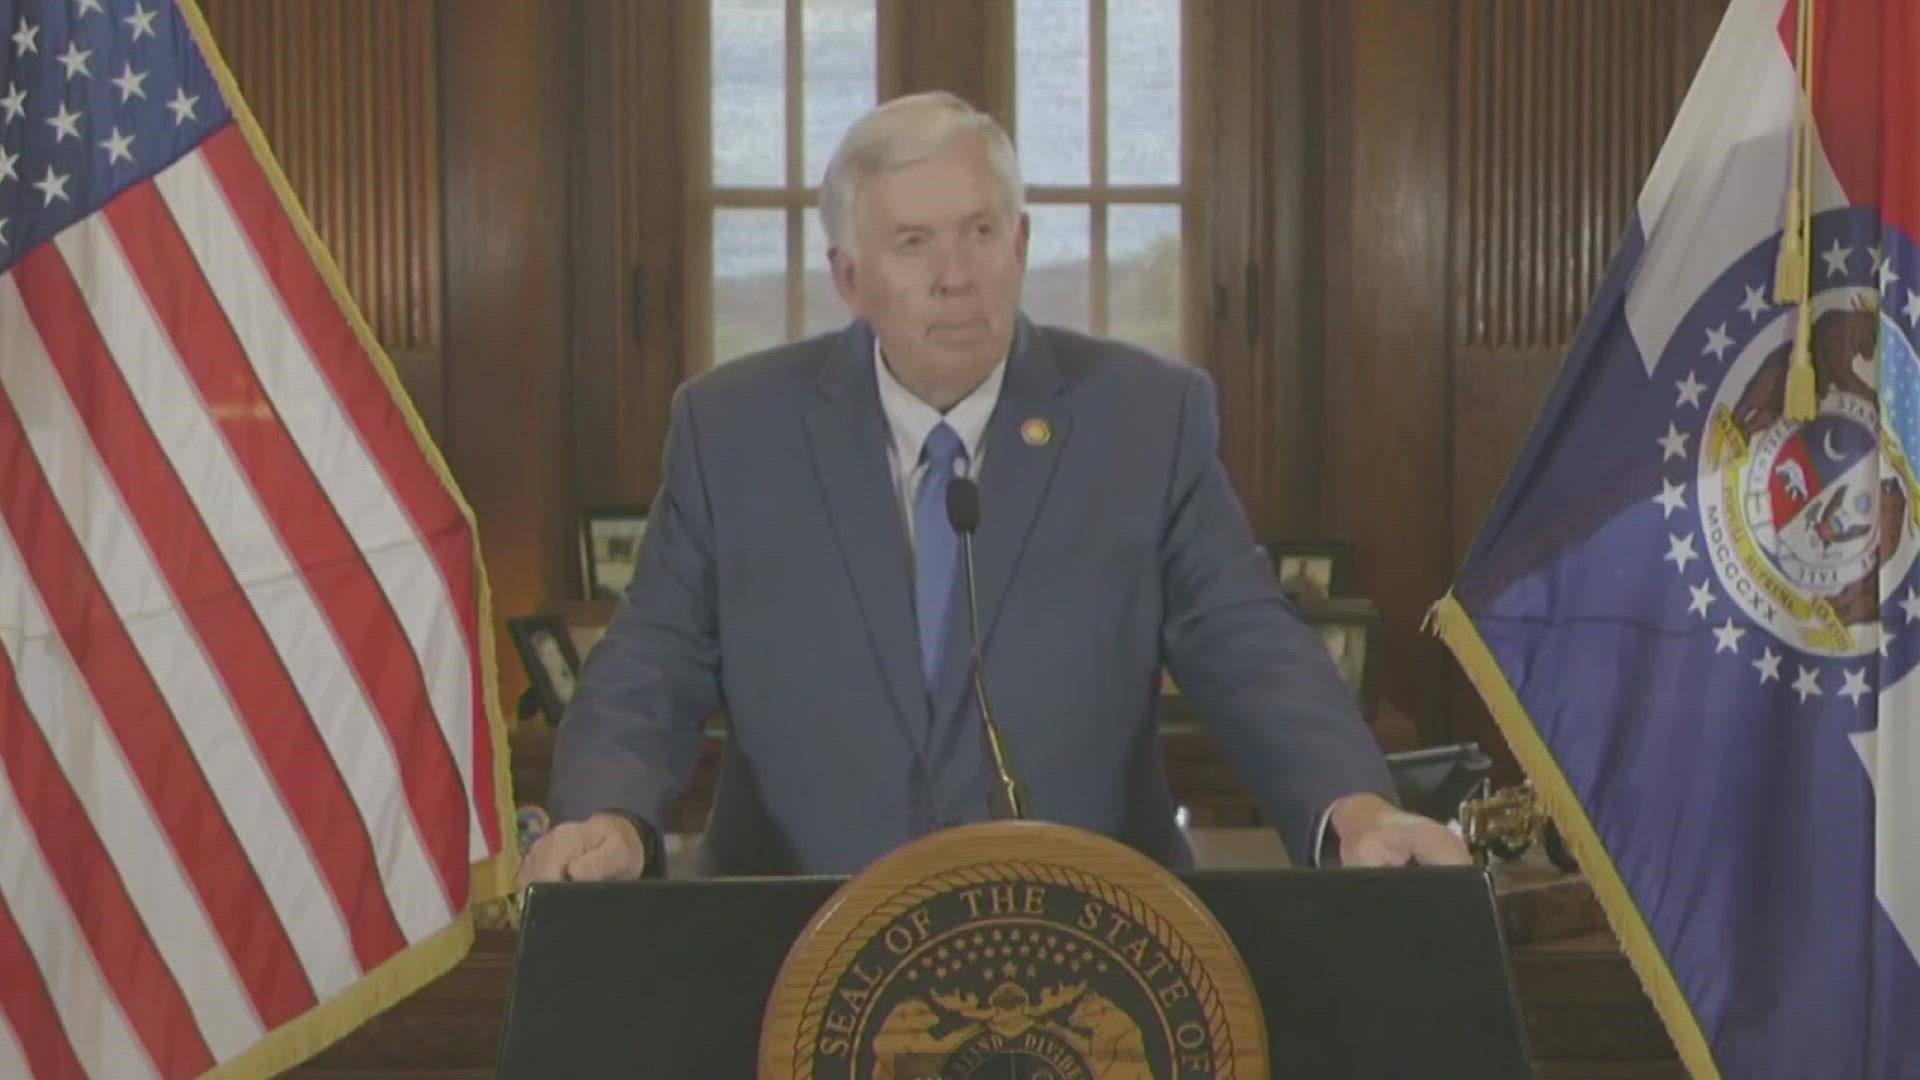 Parson said the tax is affordable because of a record state surplus. He said the special session will begin Sept. 6.